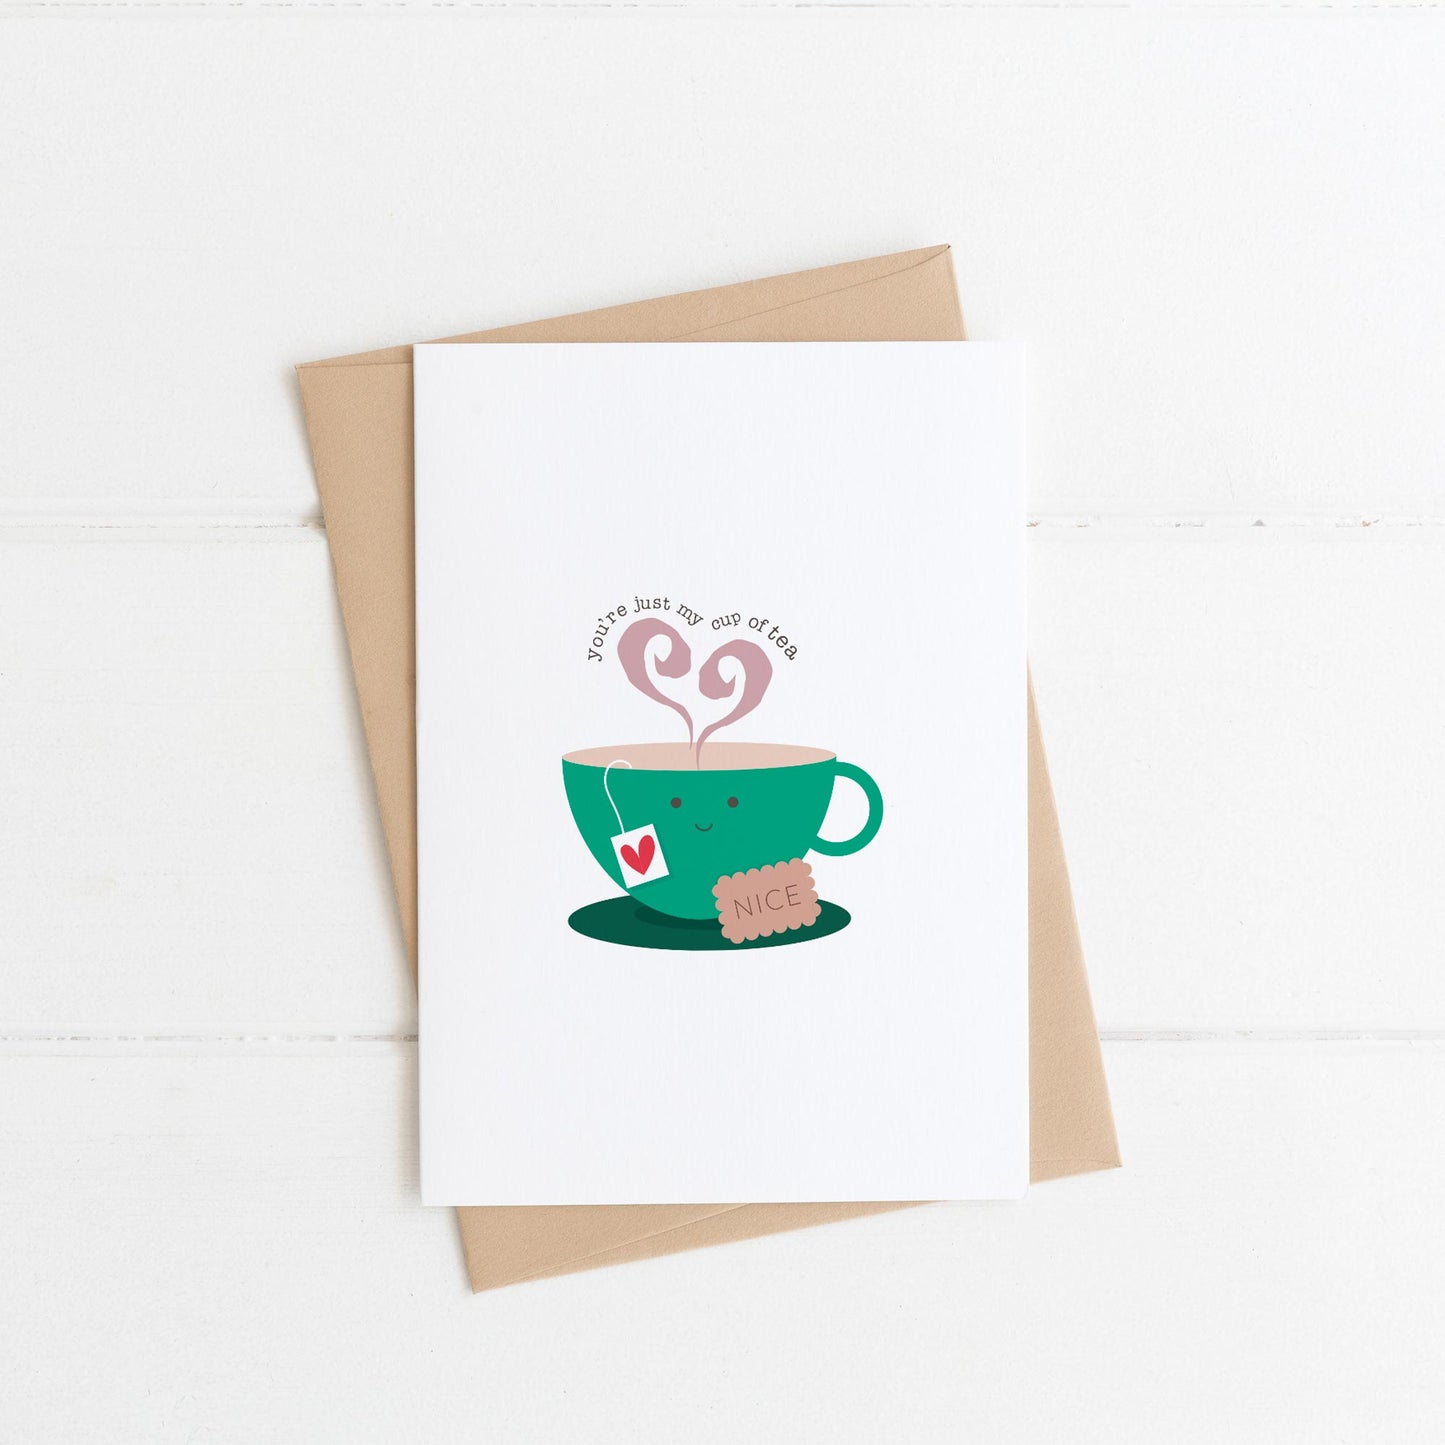 A6 Valentines Card with a cup of tea and biscuit with steam rising - Just my cup of tea written above the steam